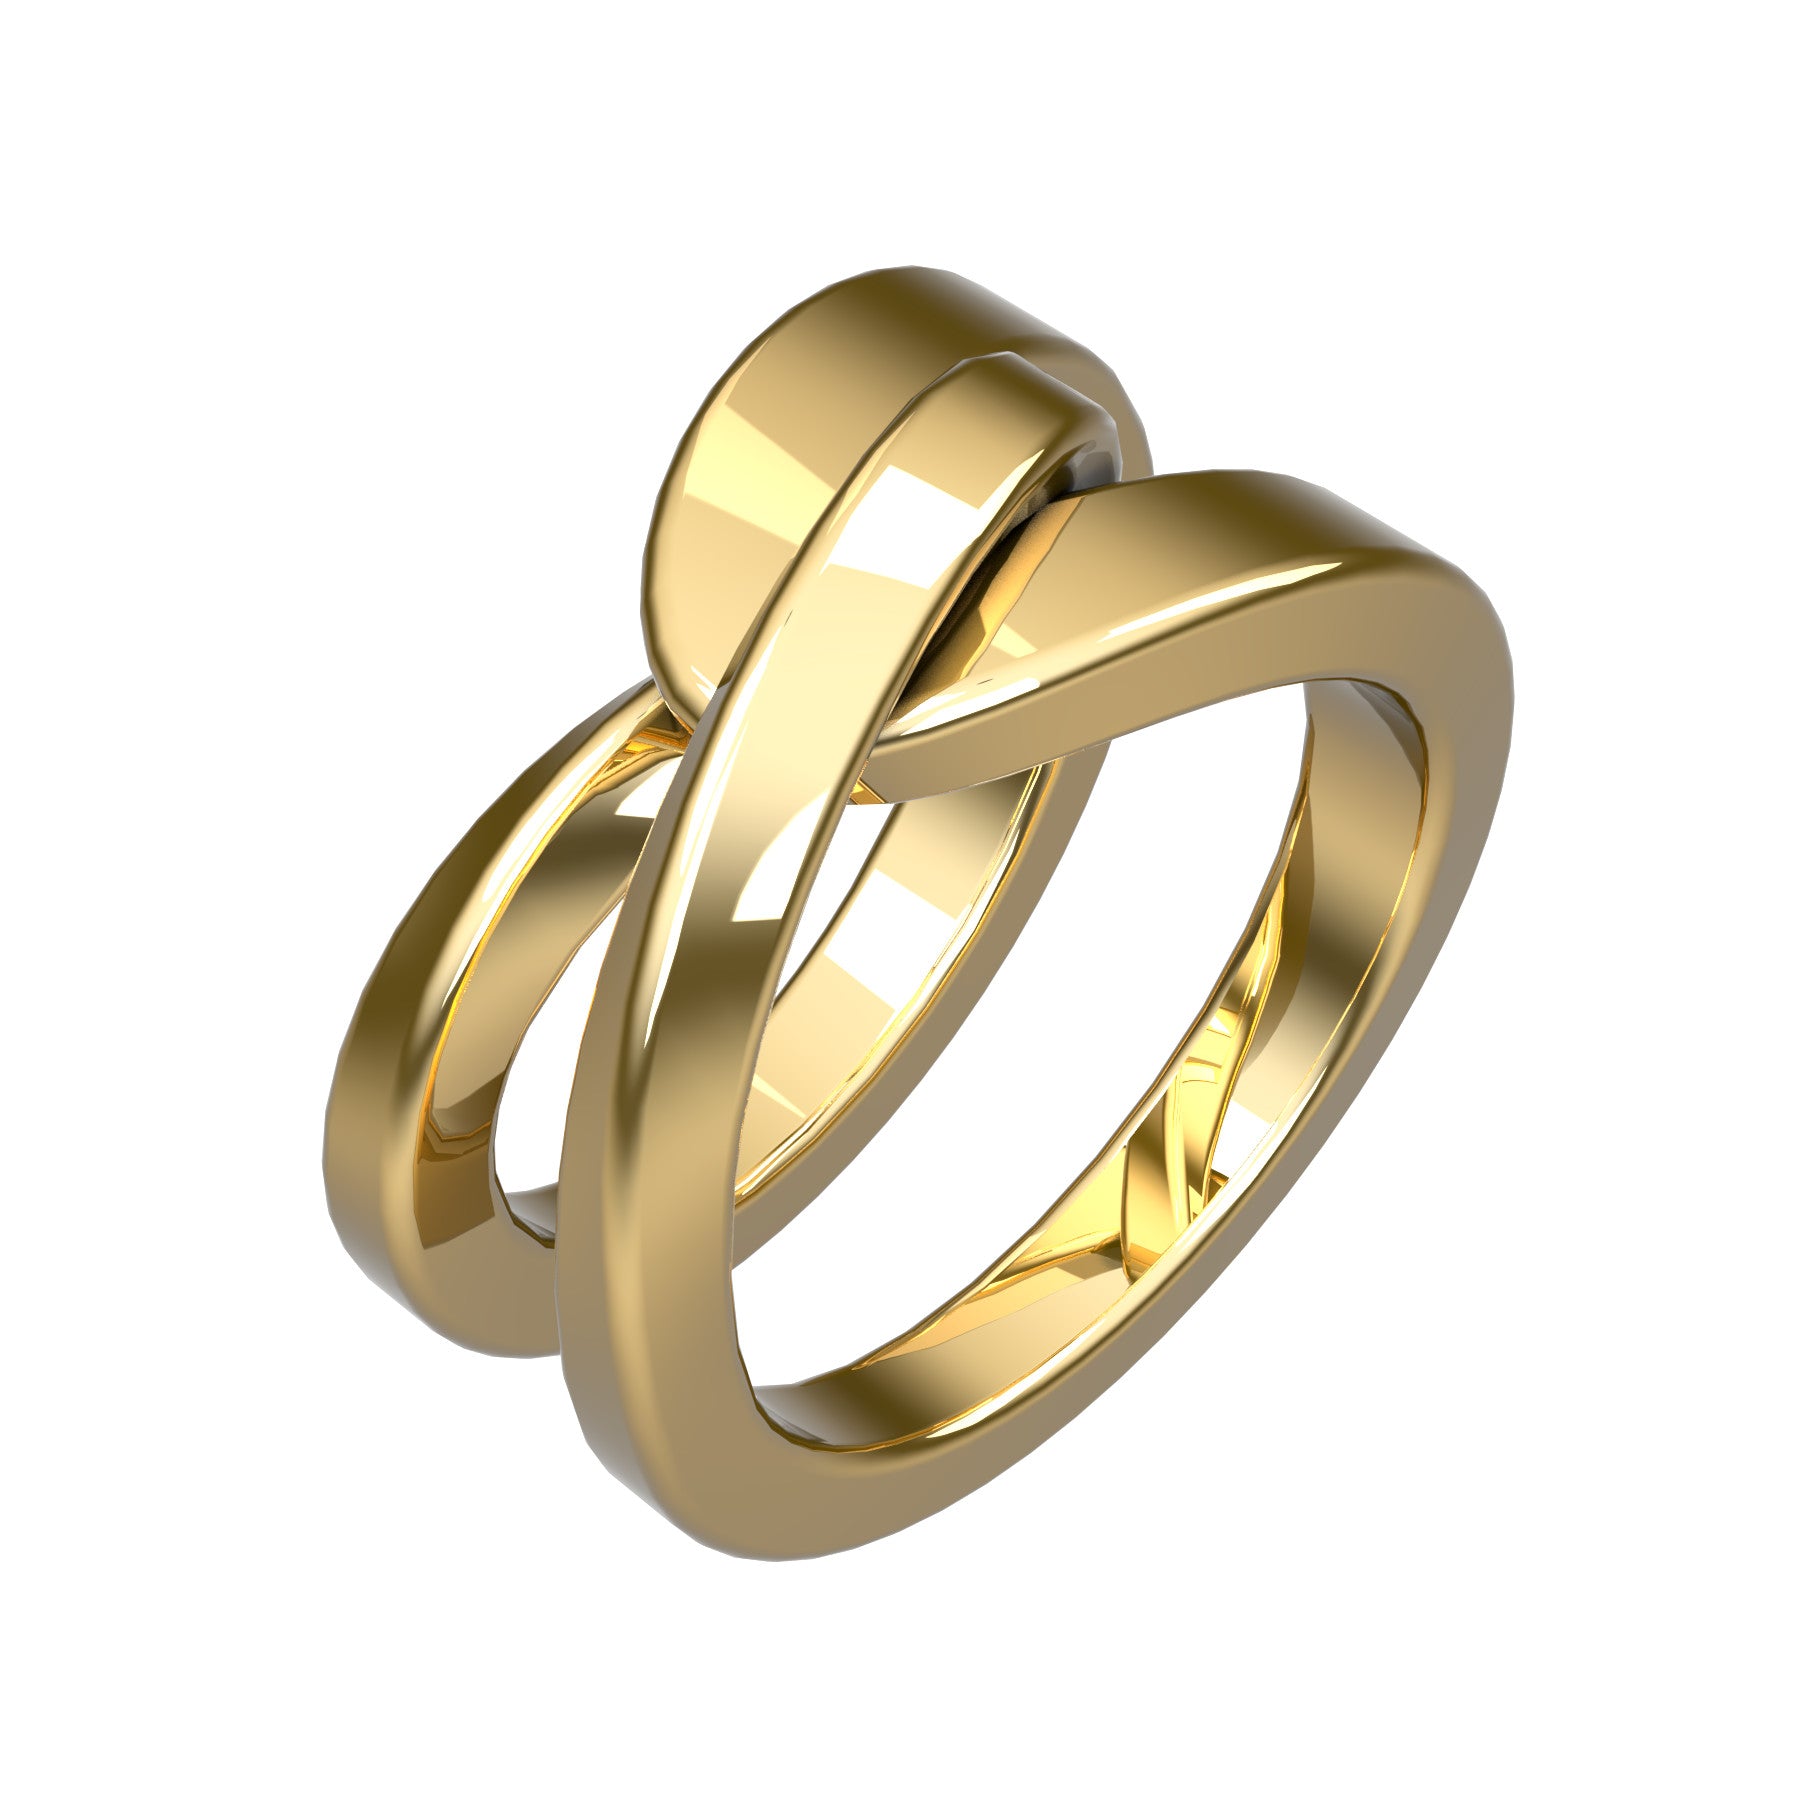 lier ring, 18 k yellow gold, weight about 14,2 g (0.50 oz), width 12,3 mm max